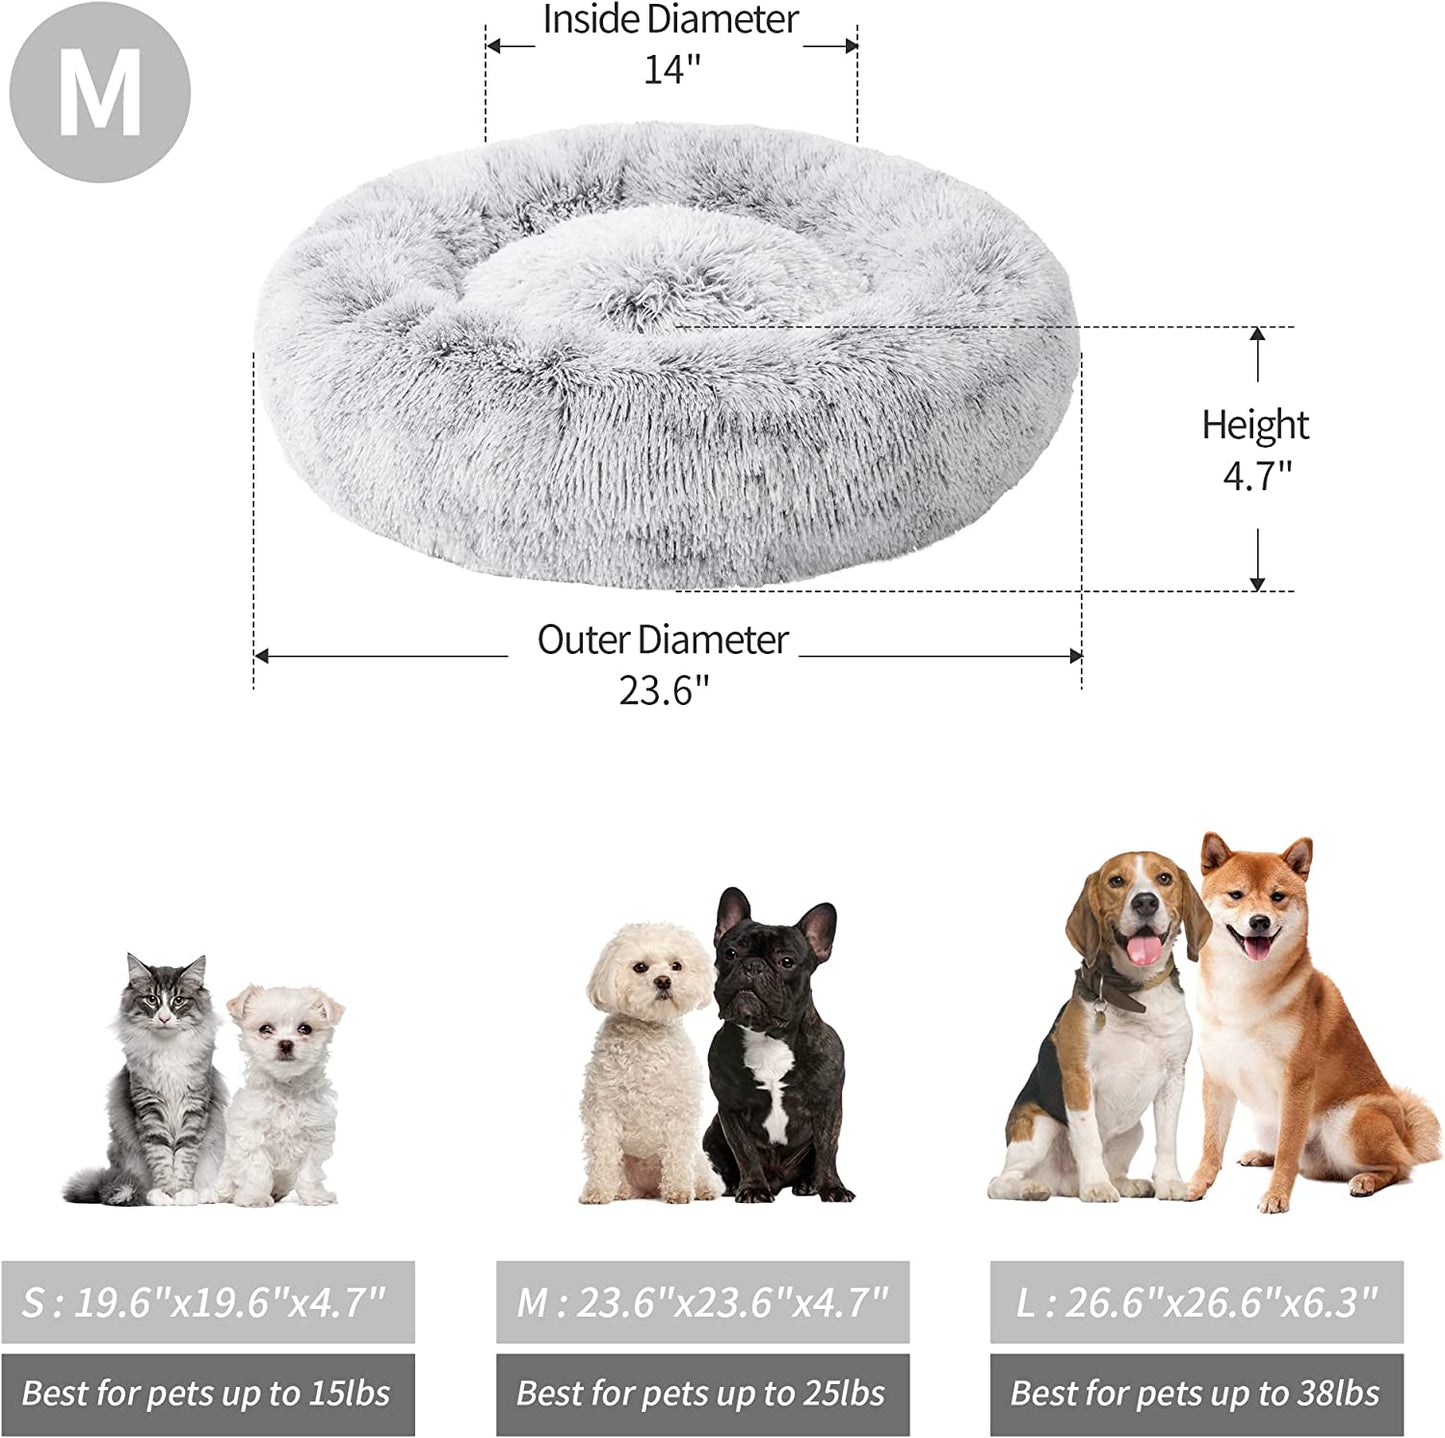 Cat Beds for Indoor Cats - Cat Bed with Machine Washable, Waterproof Bottom - Fluffy Dog and Cat Calming Cushion Bed for Joint-Relief and Sleep Improvement